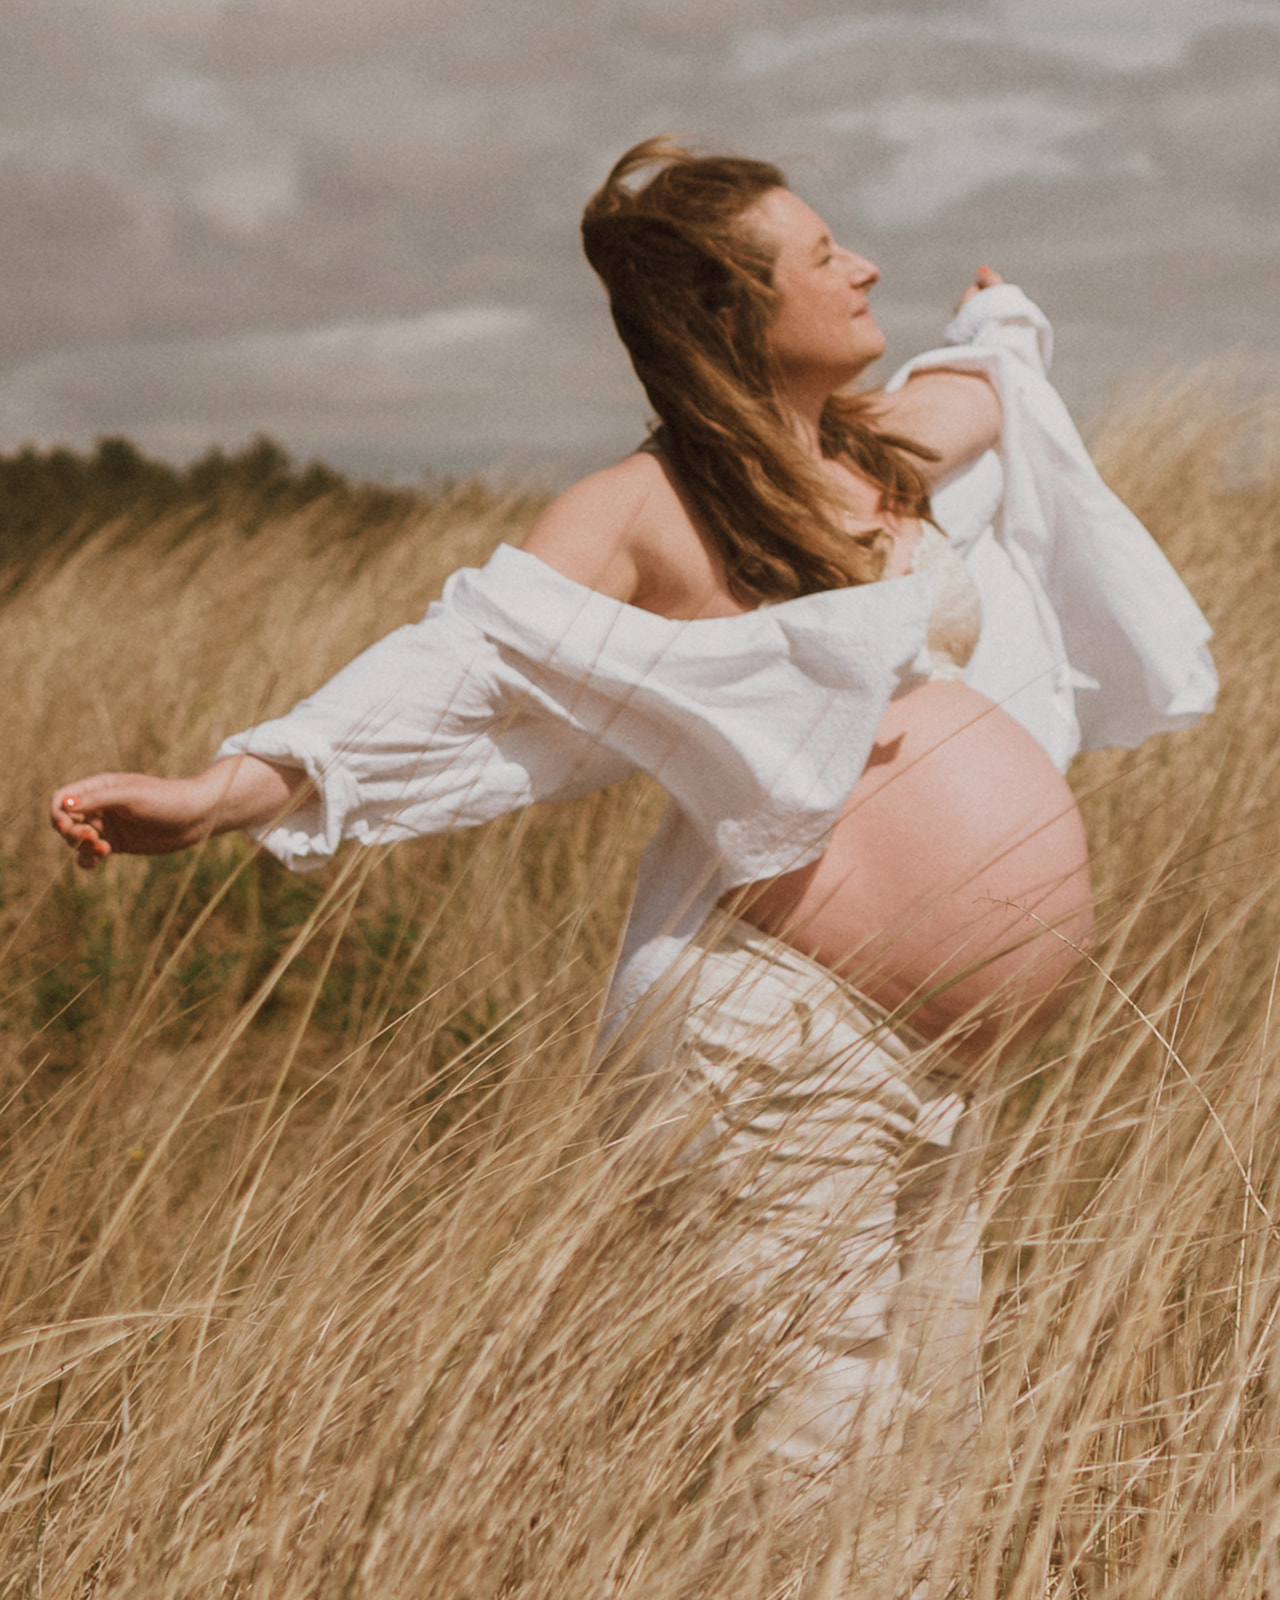 Pregnant lady dances at Tentsmuir Sands during maternity photoshoot with Tamar Hope Photography